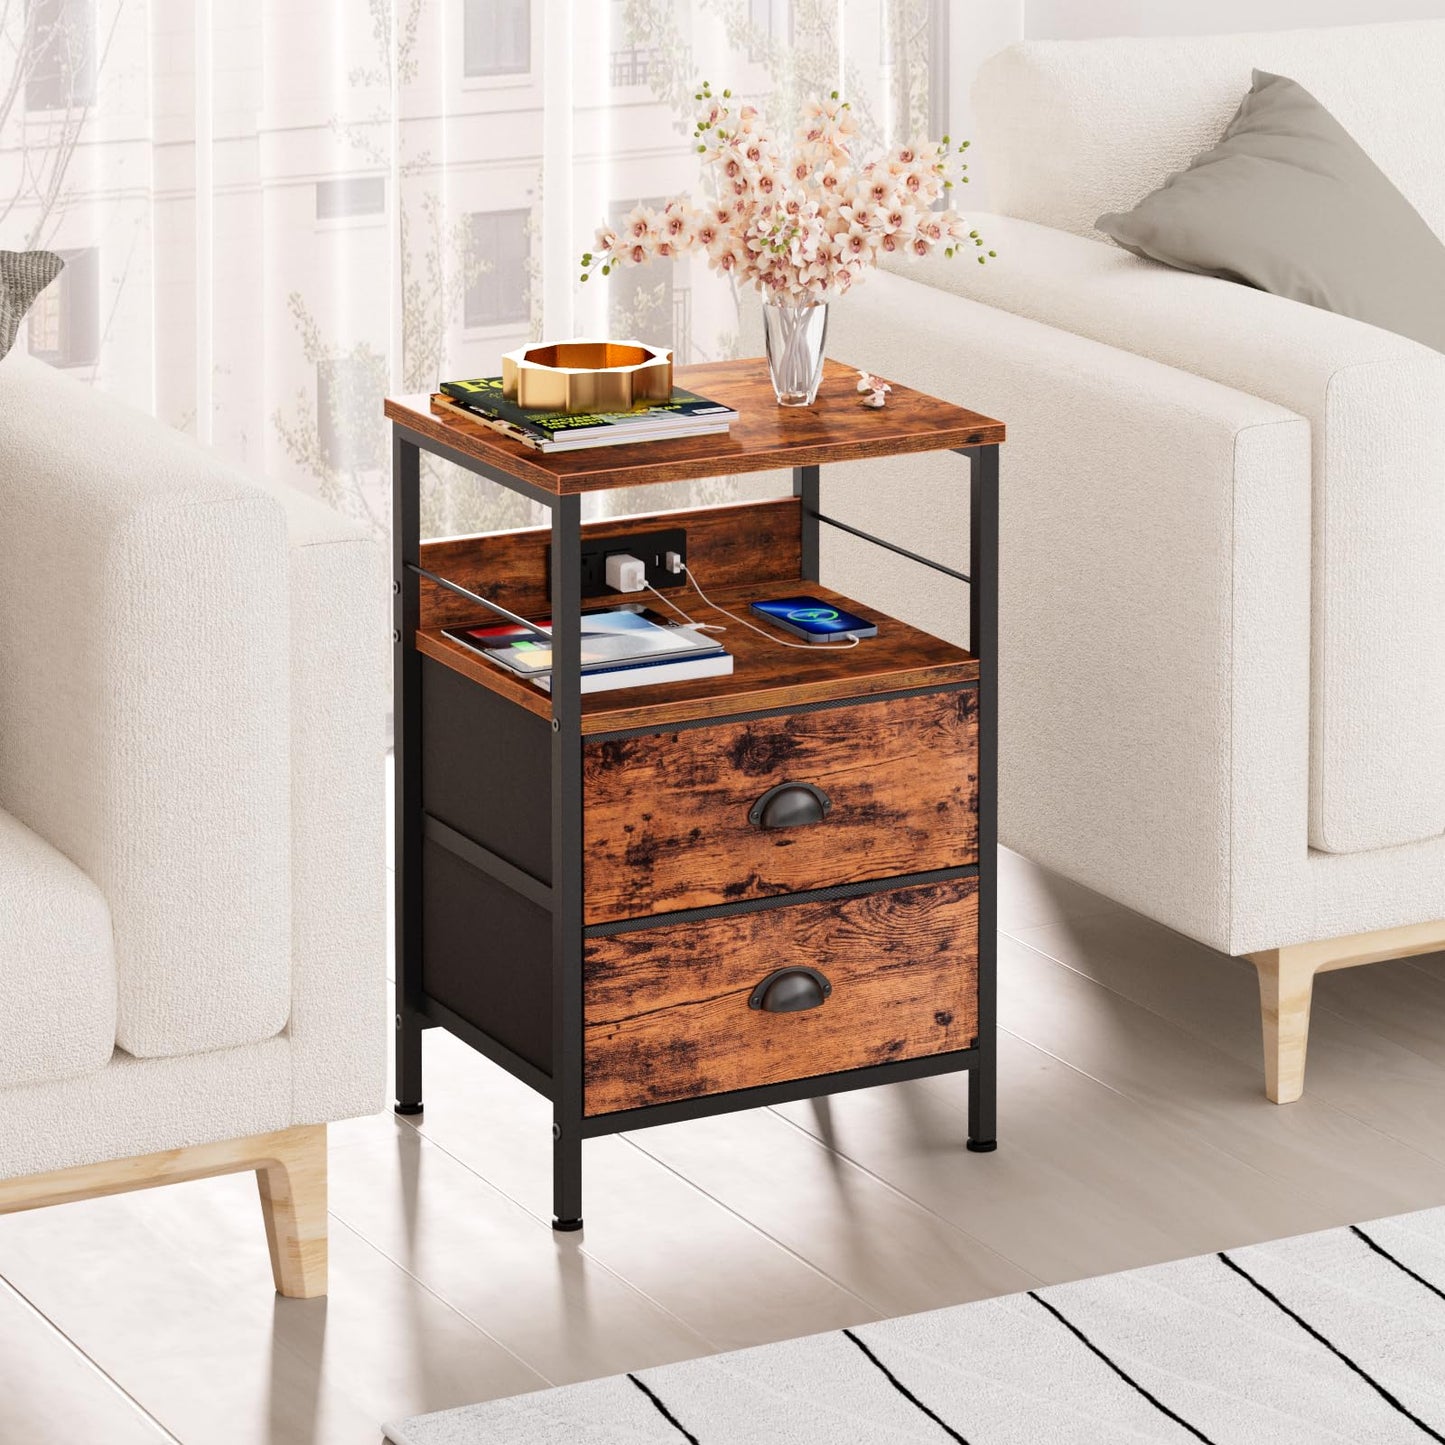 Furologee Nightstand Set of 2, Rustic Brown, with Charging Station and USB Ports, Side Tables with 2 Fabric Drawers, Bedside Tables with Storage